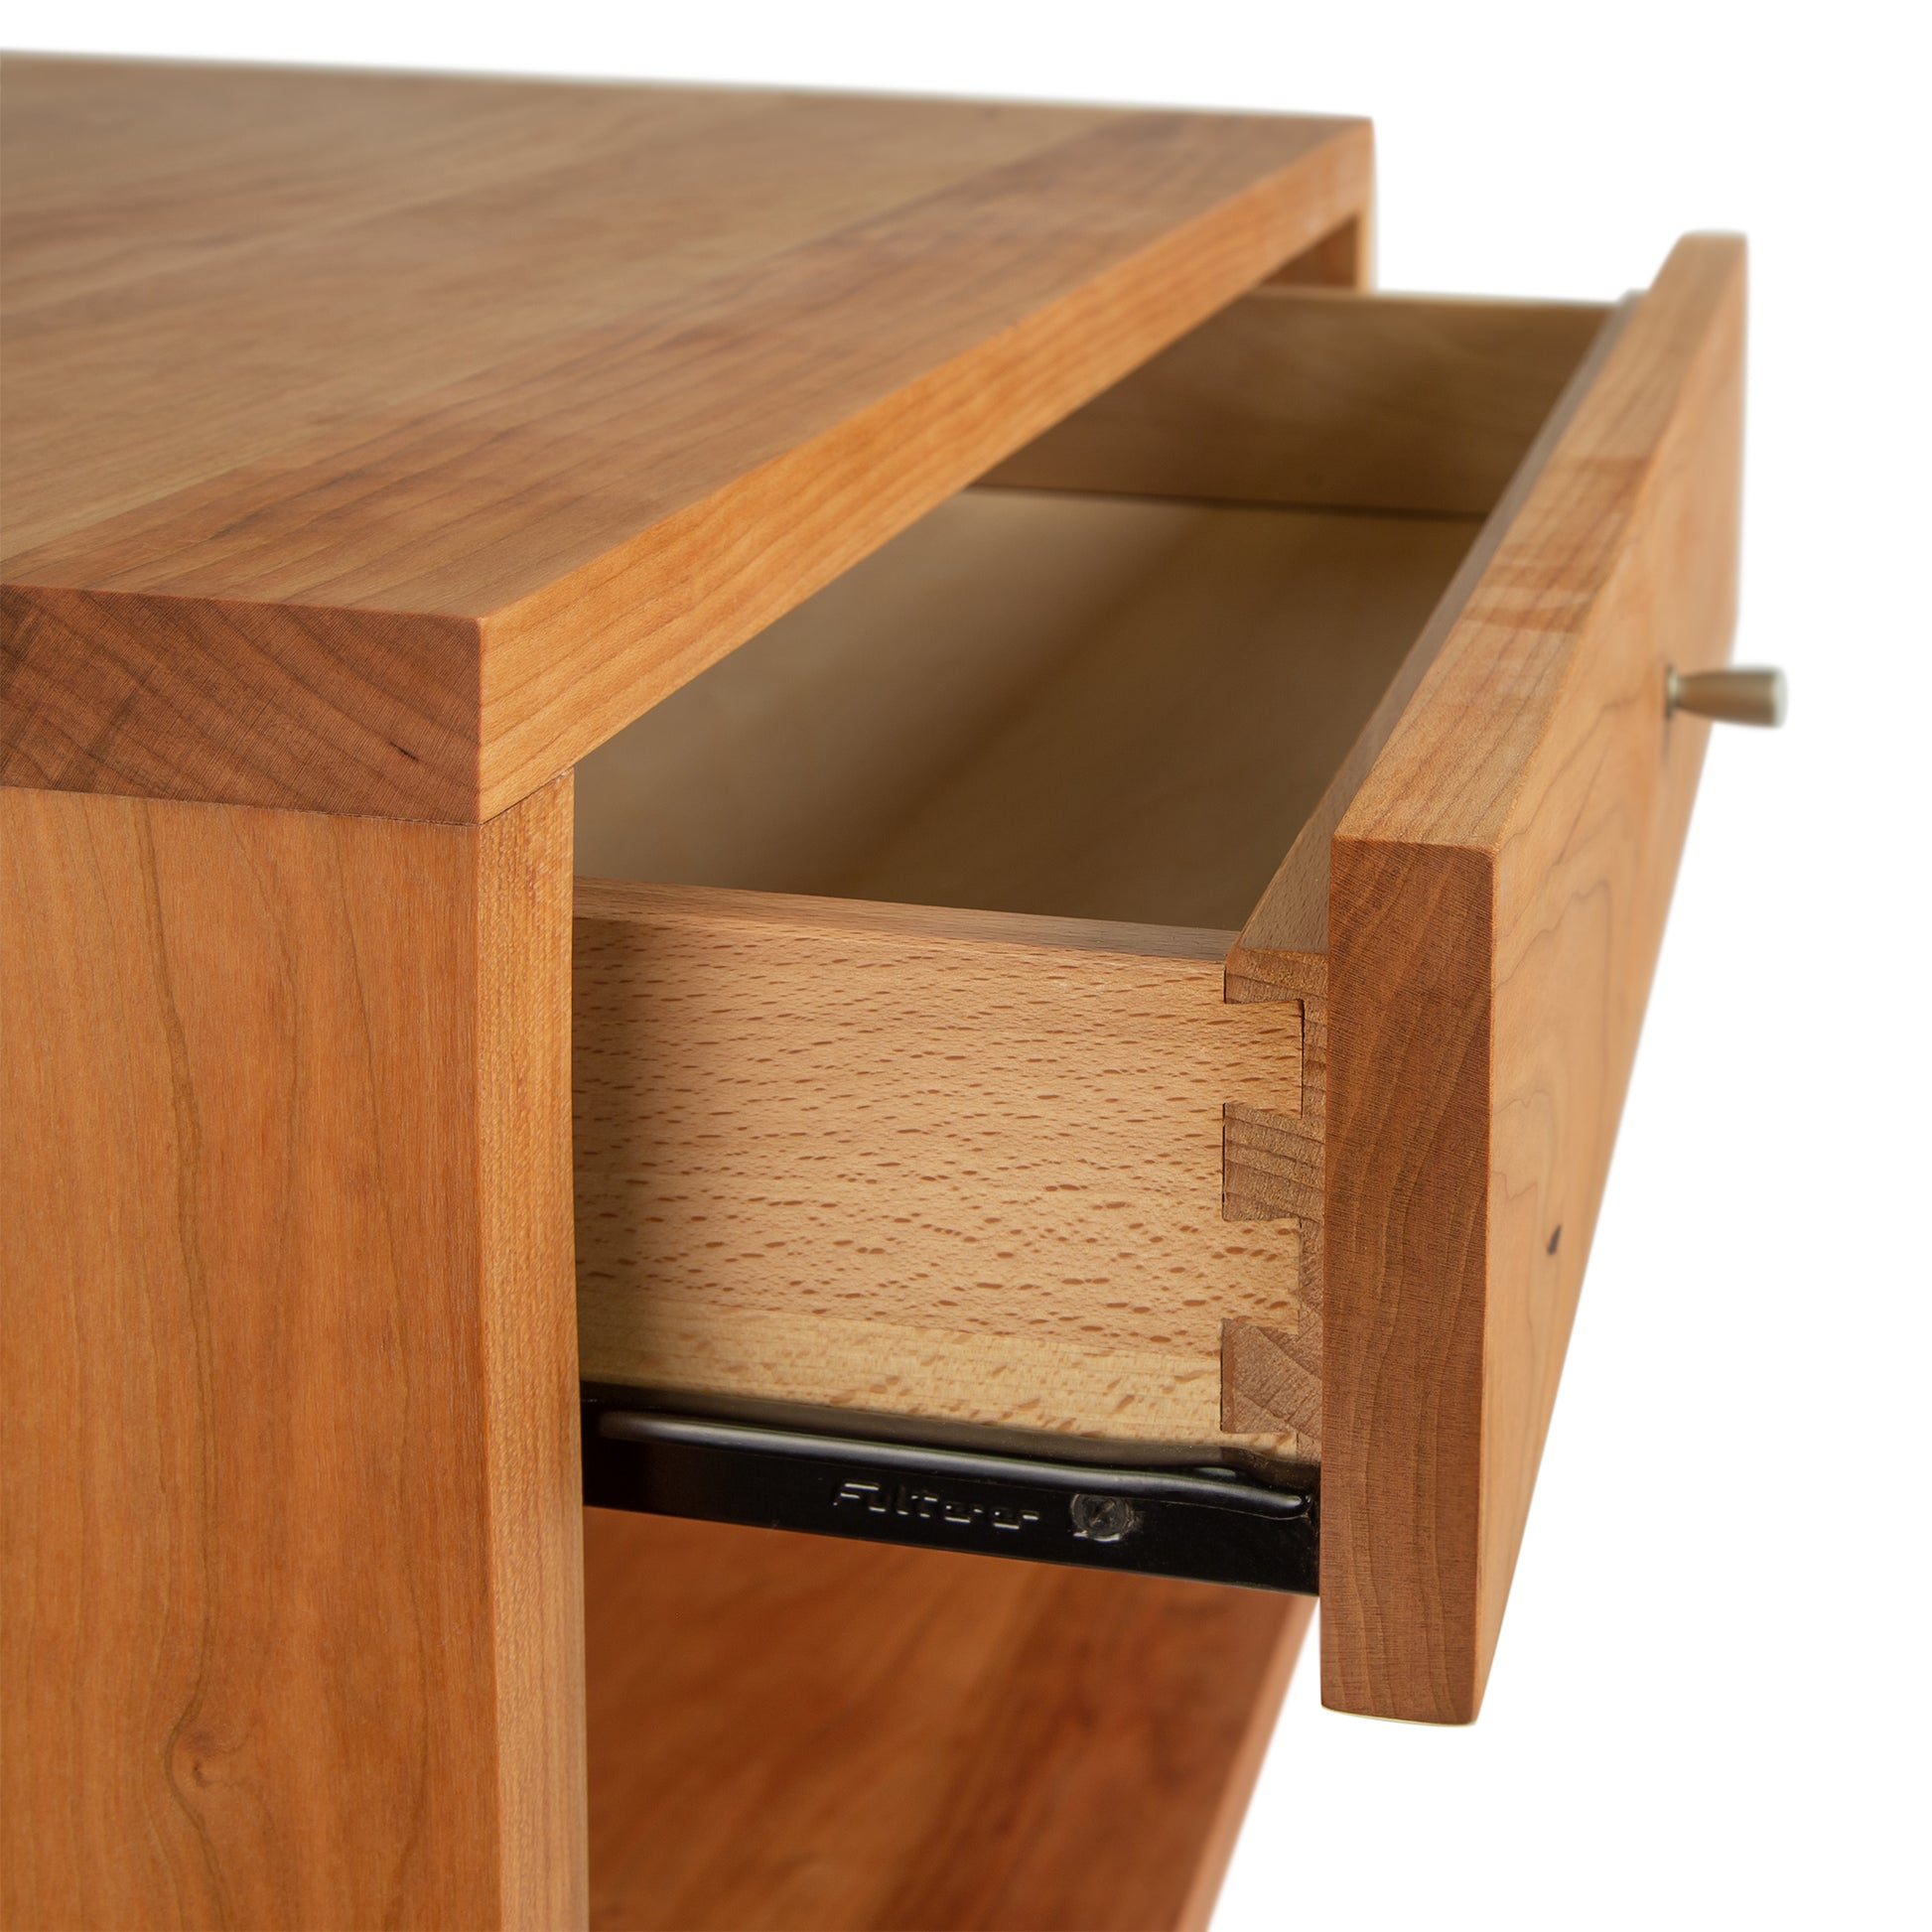 A close up of a Larssen 1-Drawer Wide Nightstand in natural cherry wood as part of the Vermont Furniture Designs Collection.